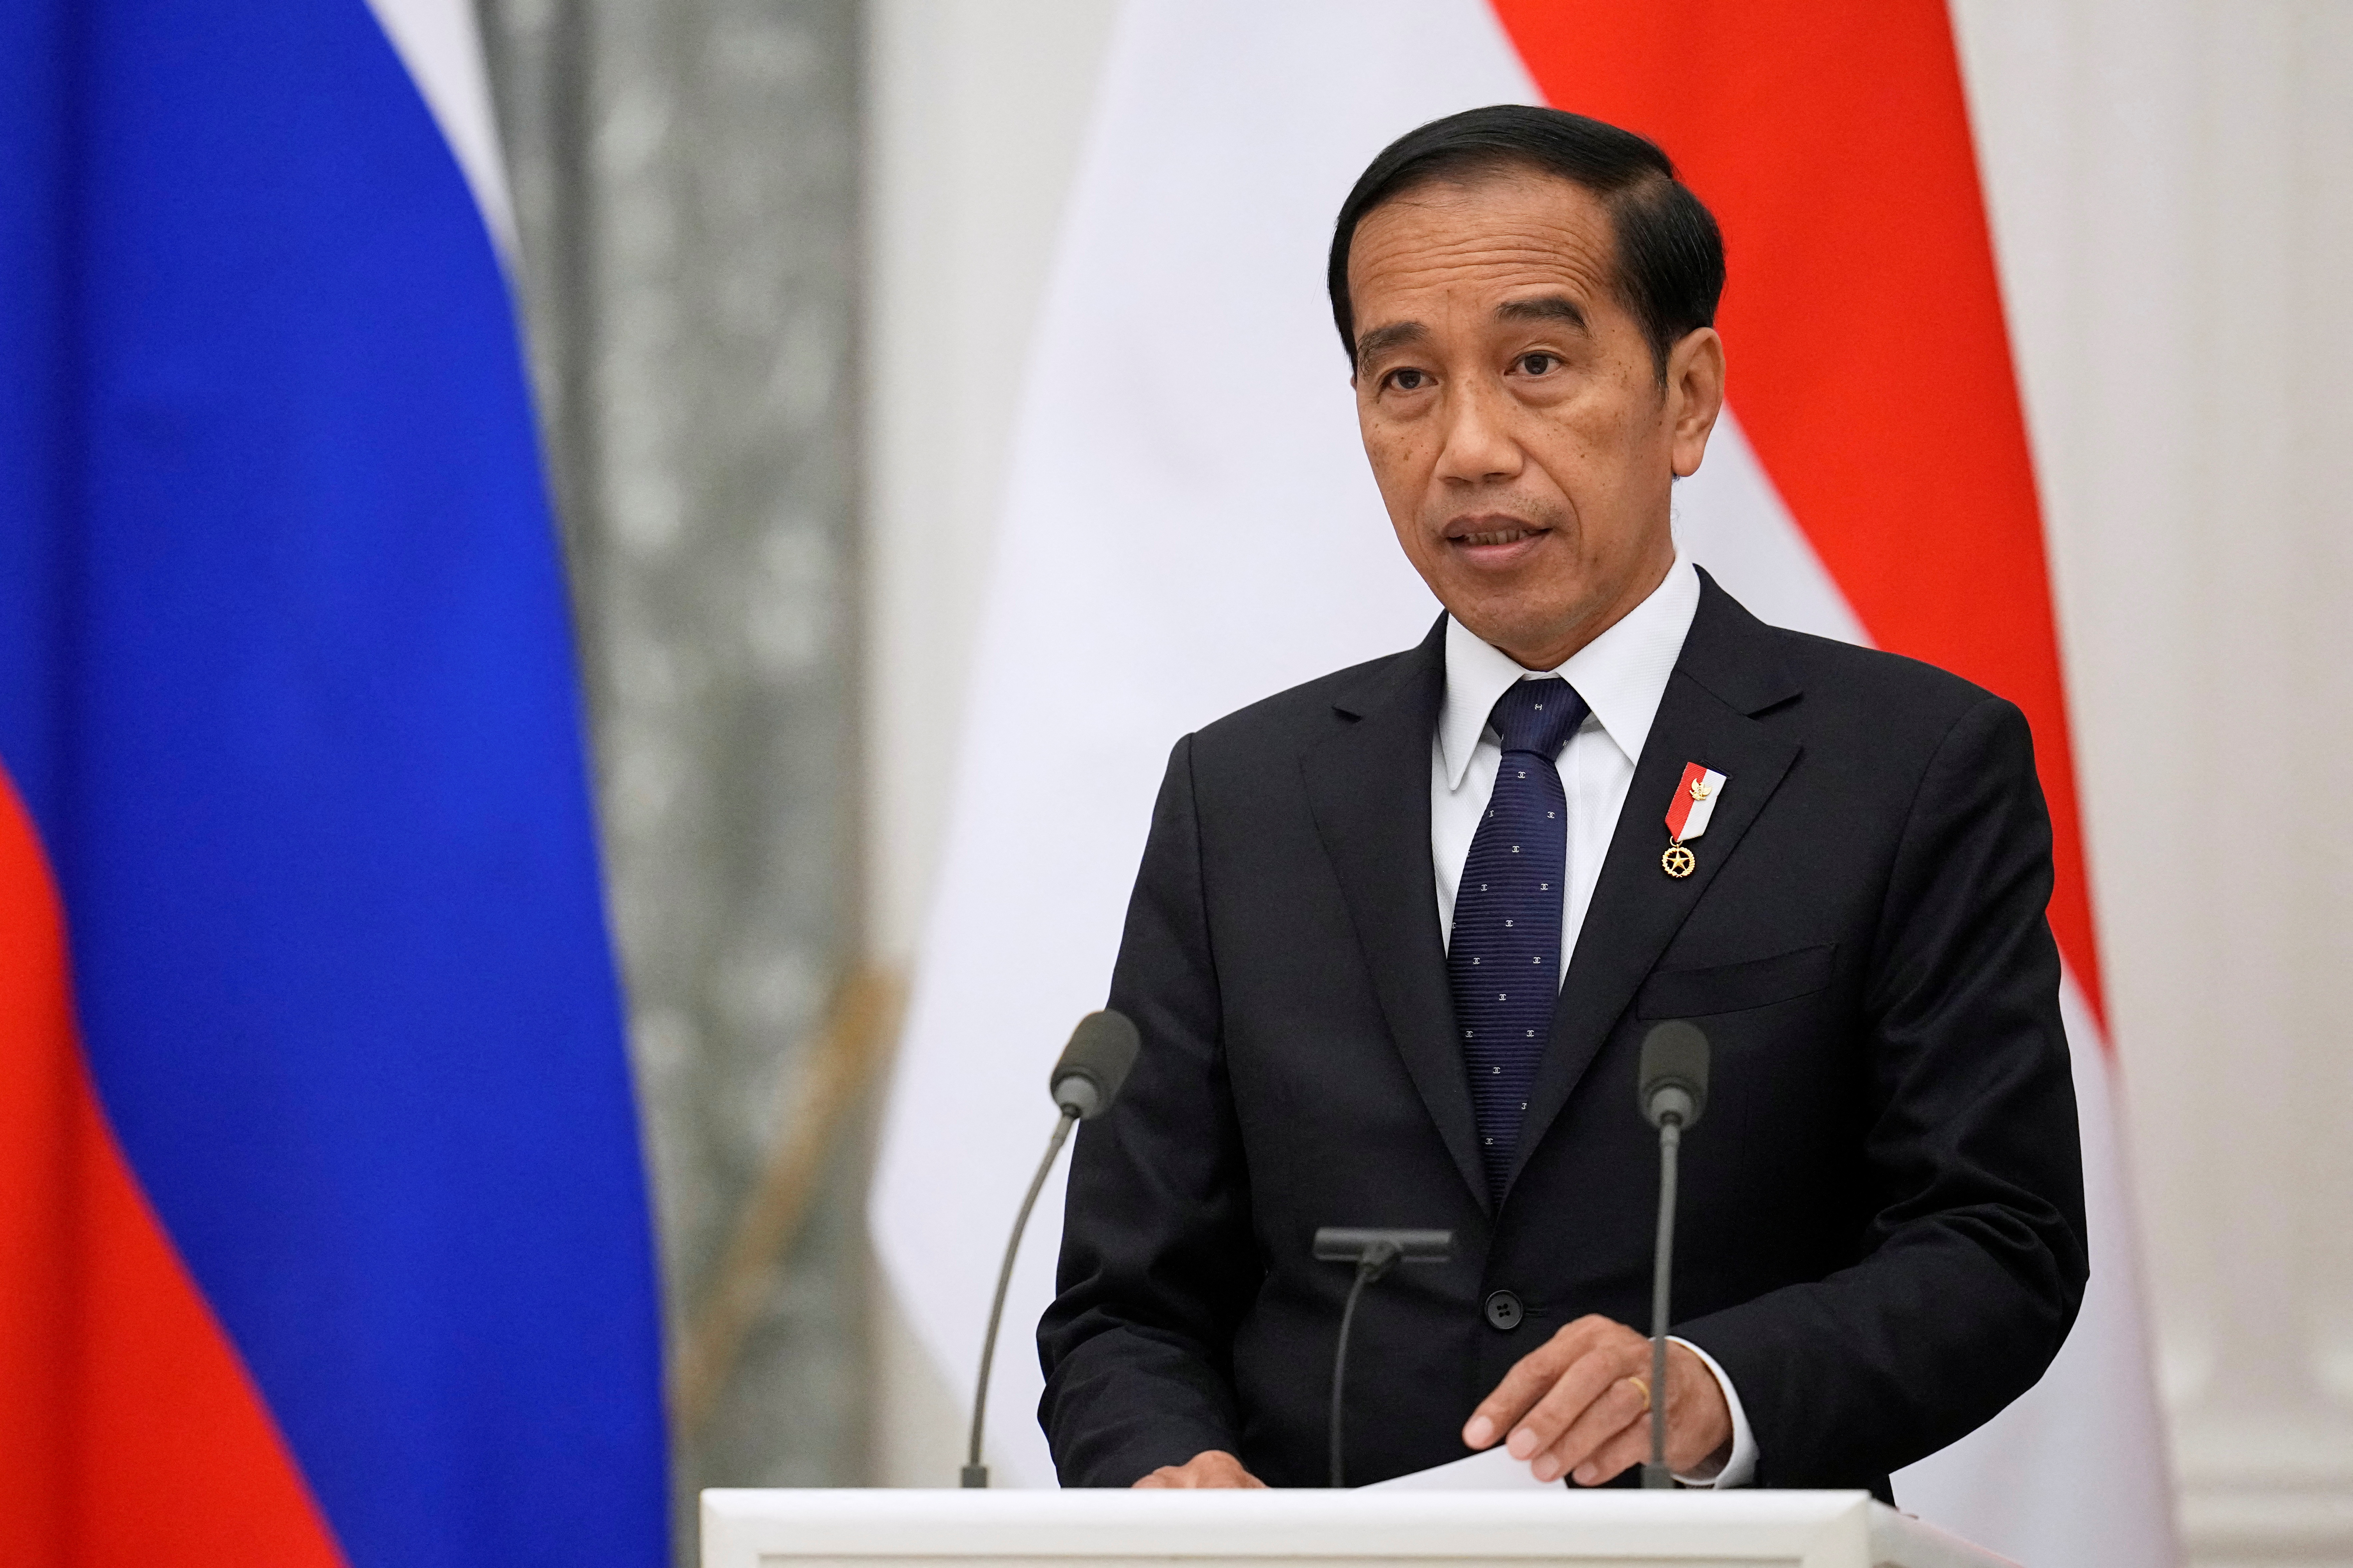 Russia's Putin meets his Indonesian counterpart Widodo in Moscow